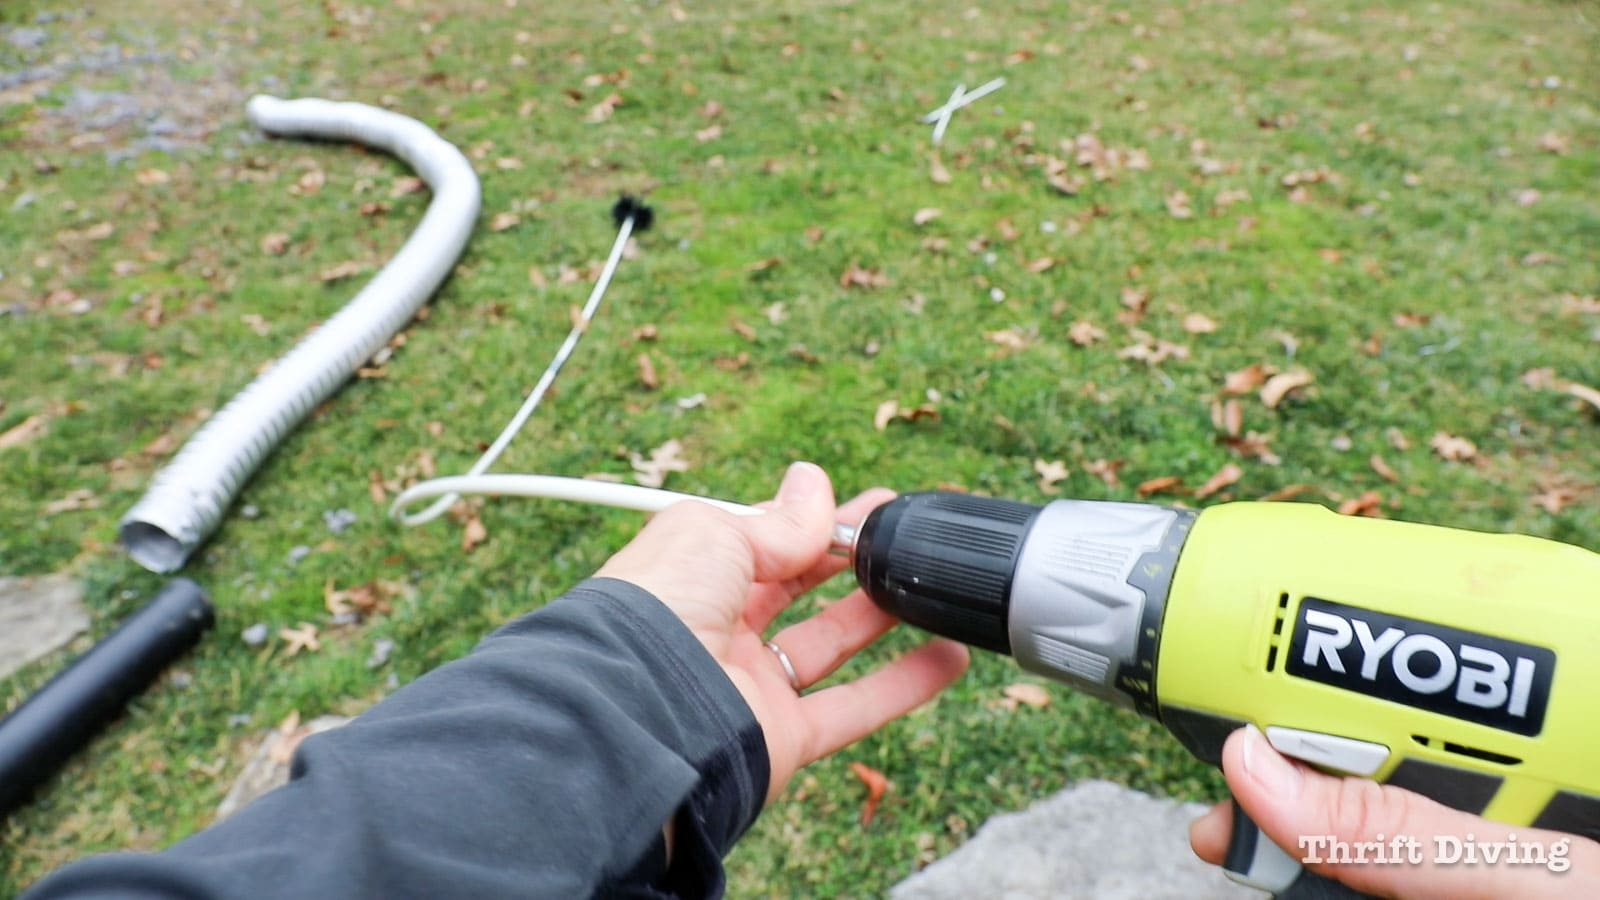 Dryer vent cleaning kit with extension rods and using a power drill. - 7 Home Maintenance Tasks - Thrift Diving